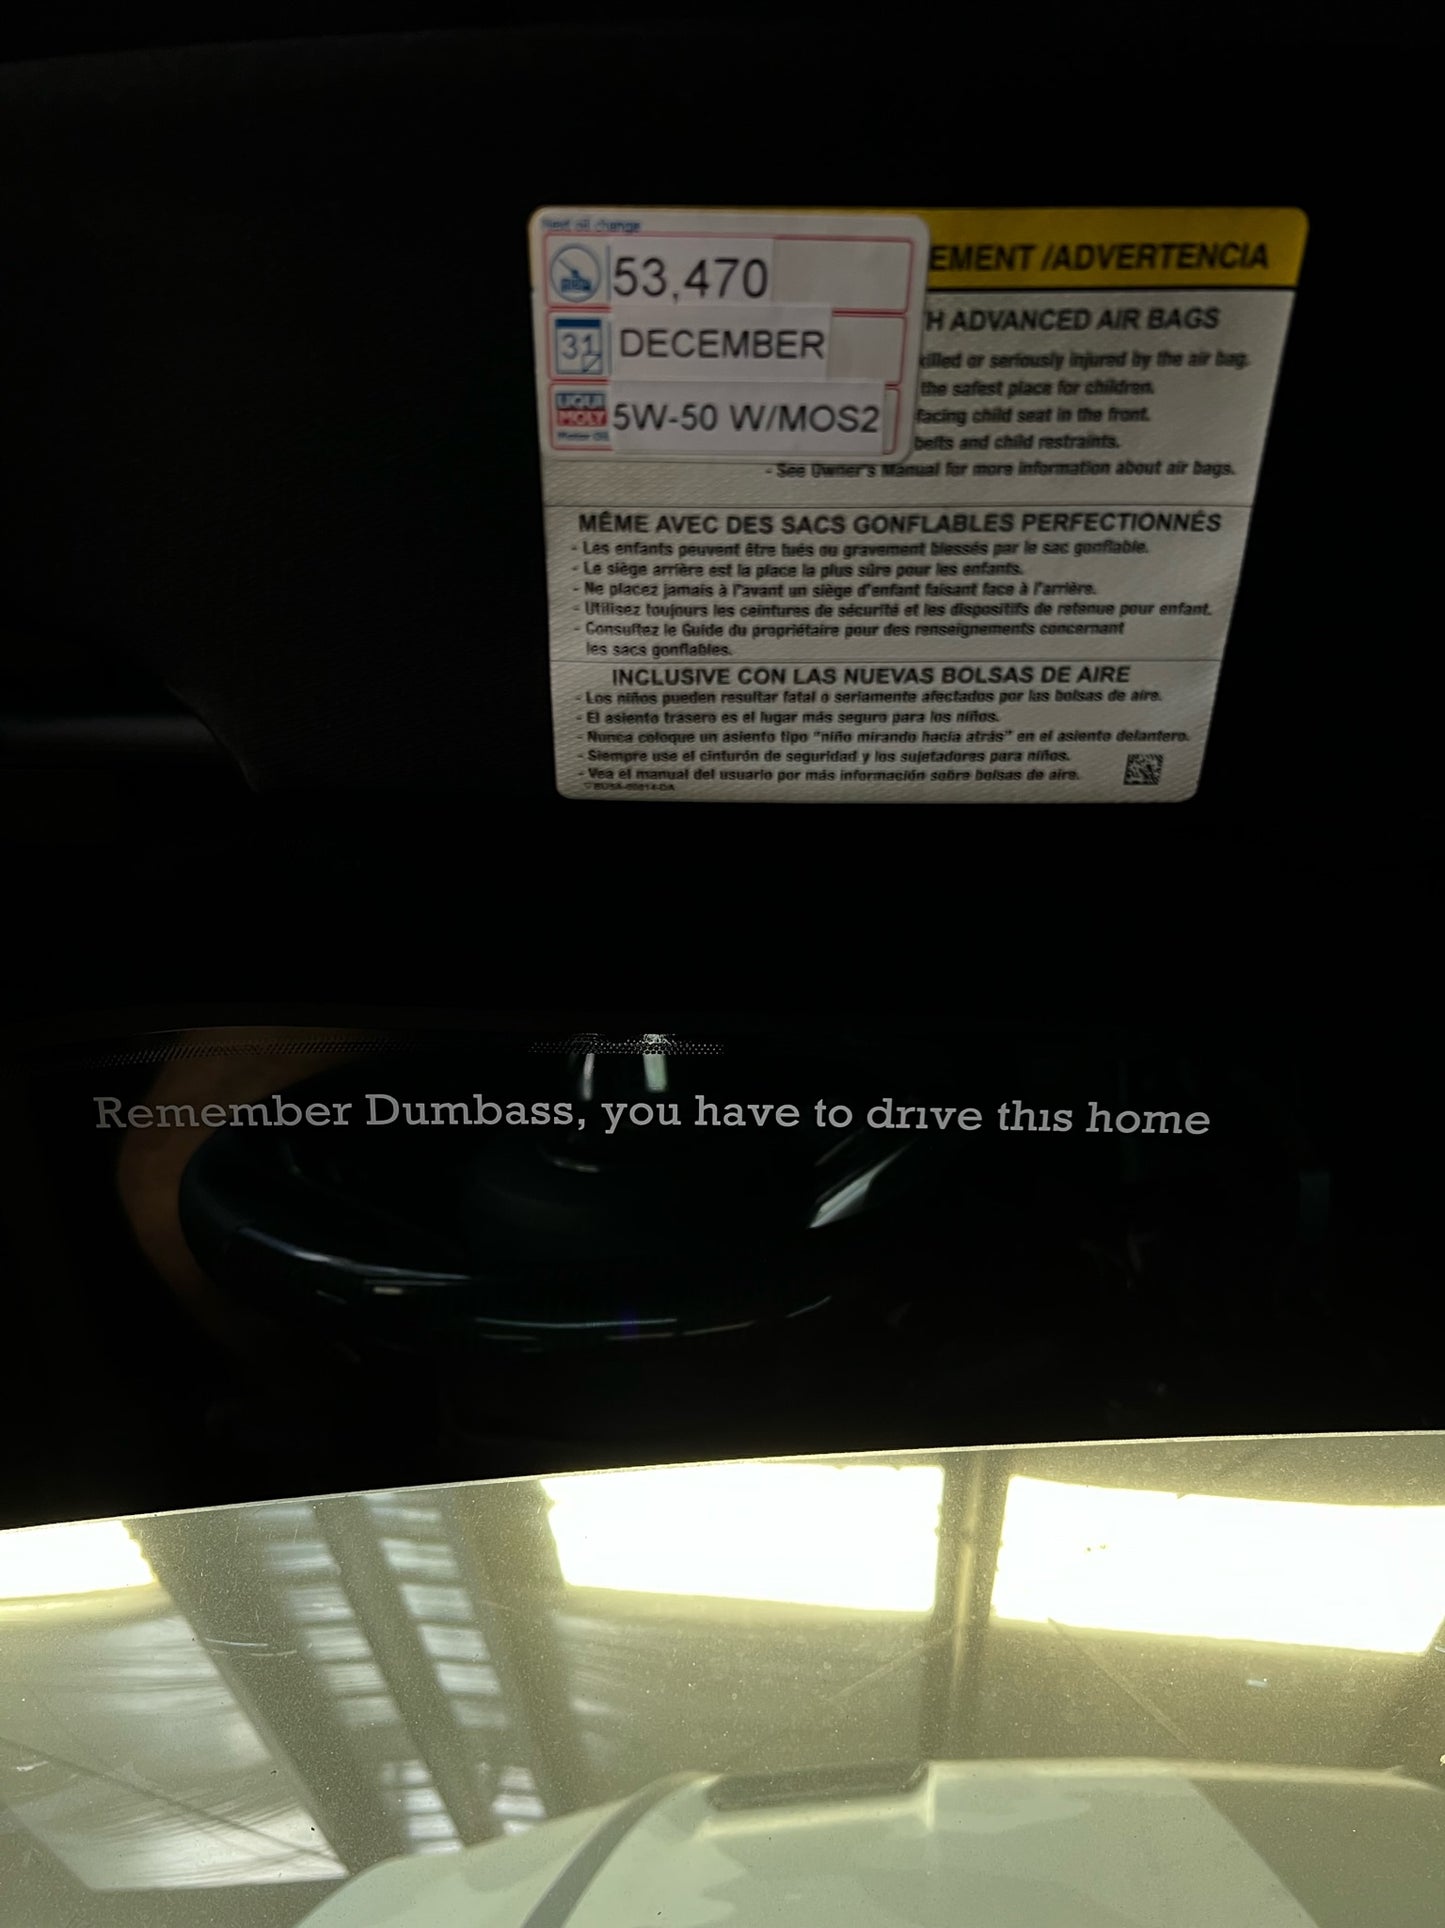 Remember Dumbass 11" - Decal (White)